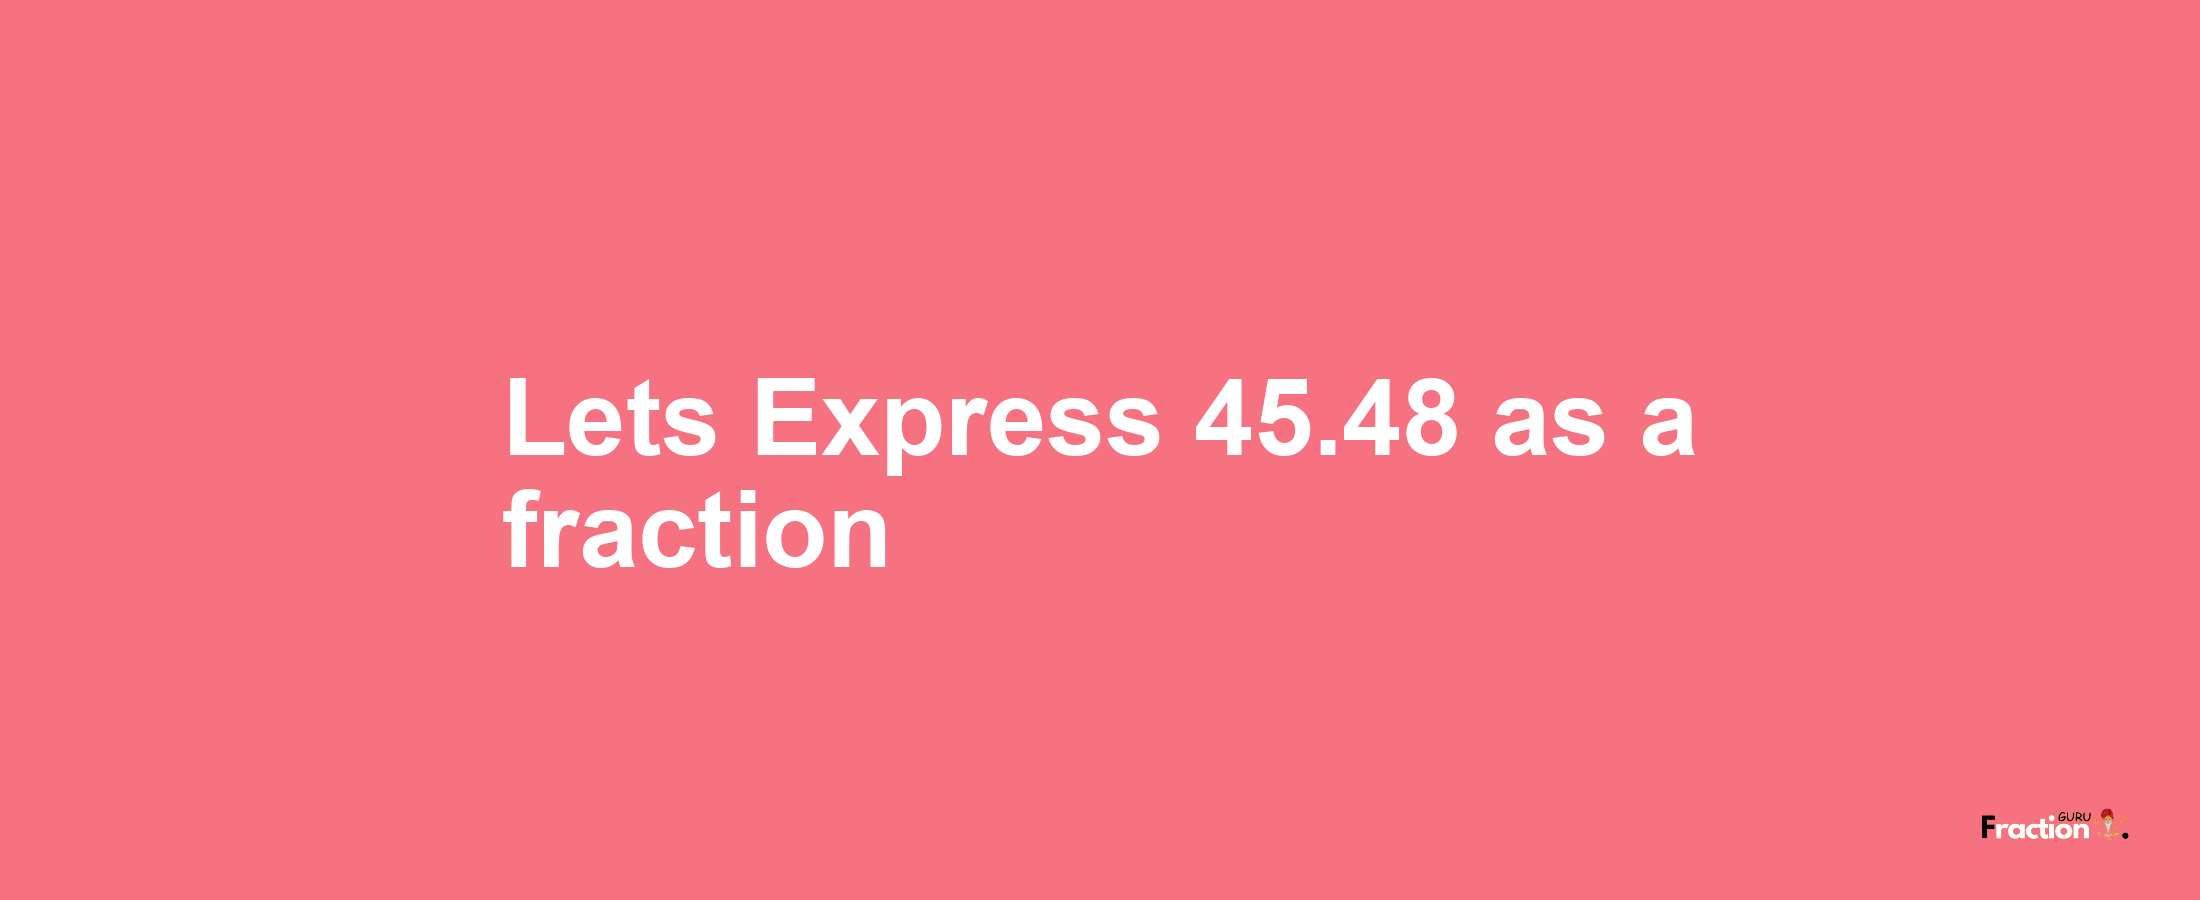 Lets Express 45.48 as afraction